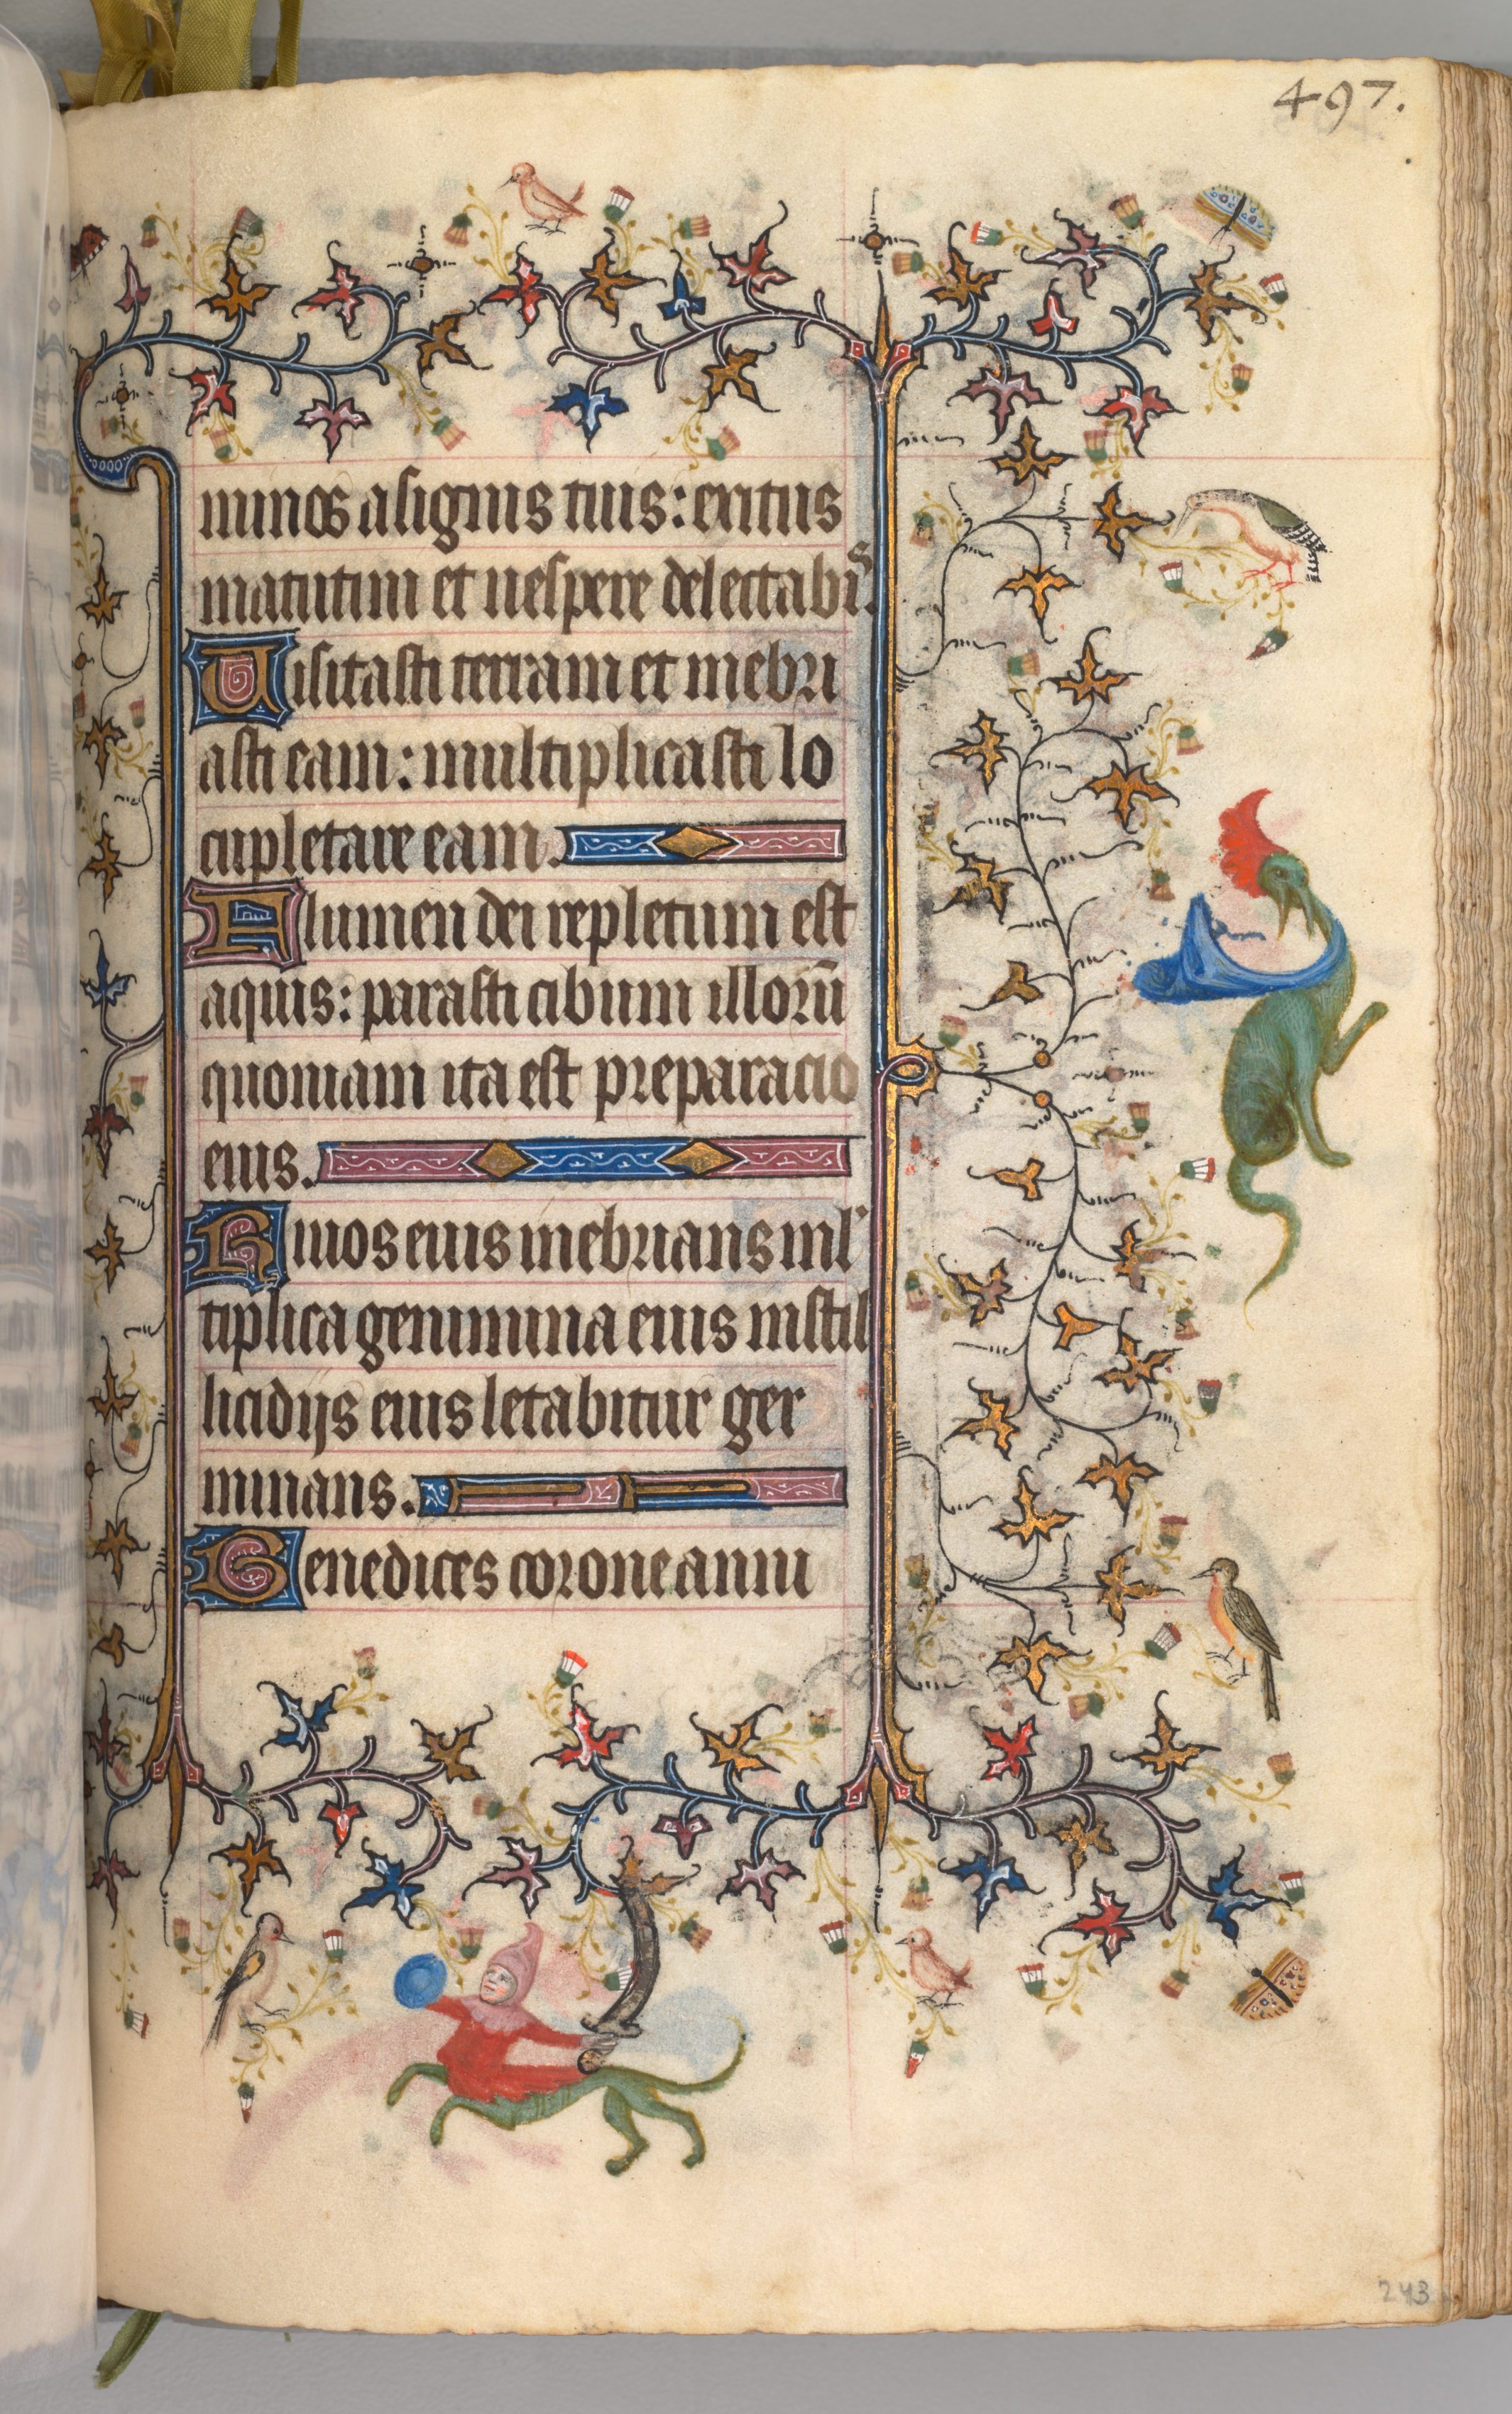 Hours of Charles the Noble, King of Navarre (1361-1425): fol. 243r, Text